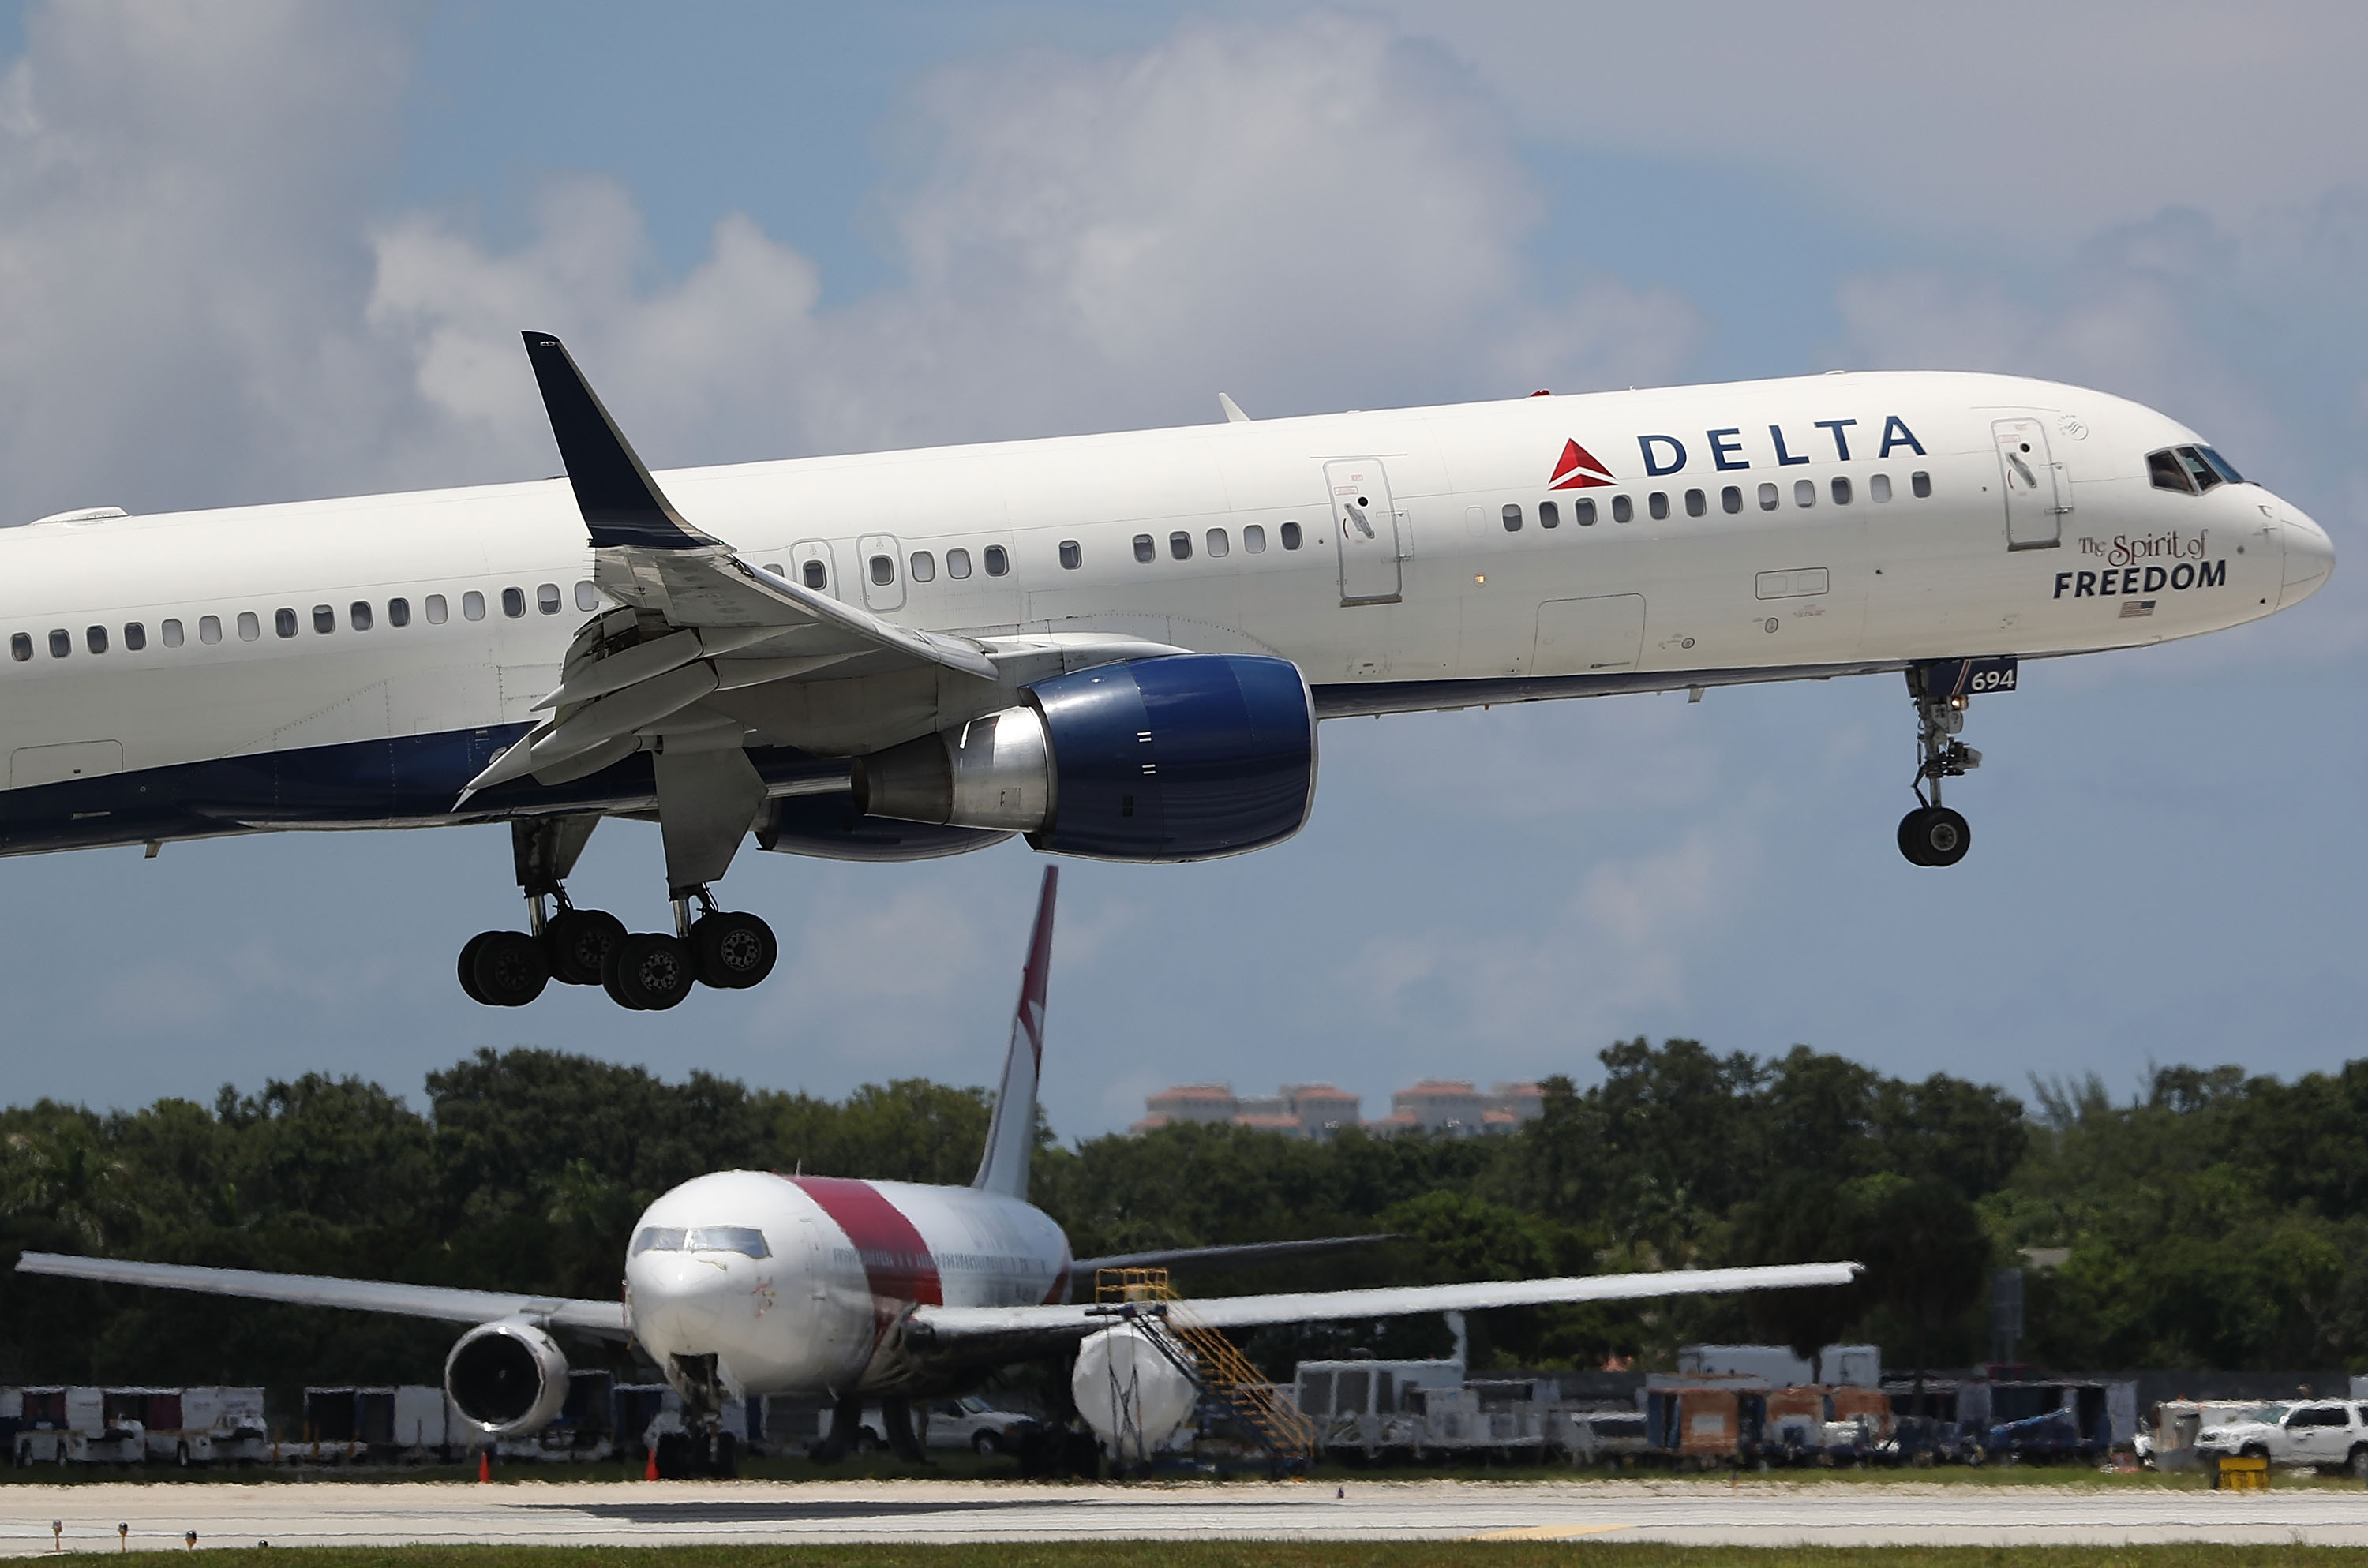 FORT LAUDERDALE, FL - JULY 14:  A Delta airlines plane is seen as it comes in for a landing at the Fort Lauderdale-Hollywood International Airport on July 14, 2016 in Fort Lauderdale, Florida. Delta Air Lines Inc. reported that their second quarter earnings rose a better-than-expected 4.1%, and also announced that they decided to reduce its United States to Britian capacity on its winter schedule because of foreign currency issues and the economic uncertainty from Brexit.  (Photo by Joe Raedle/Getty Images) (Joe Raedle—Getty Images)